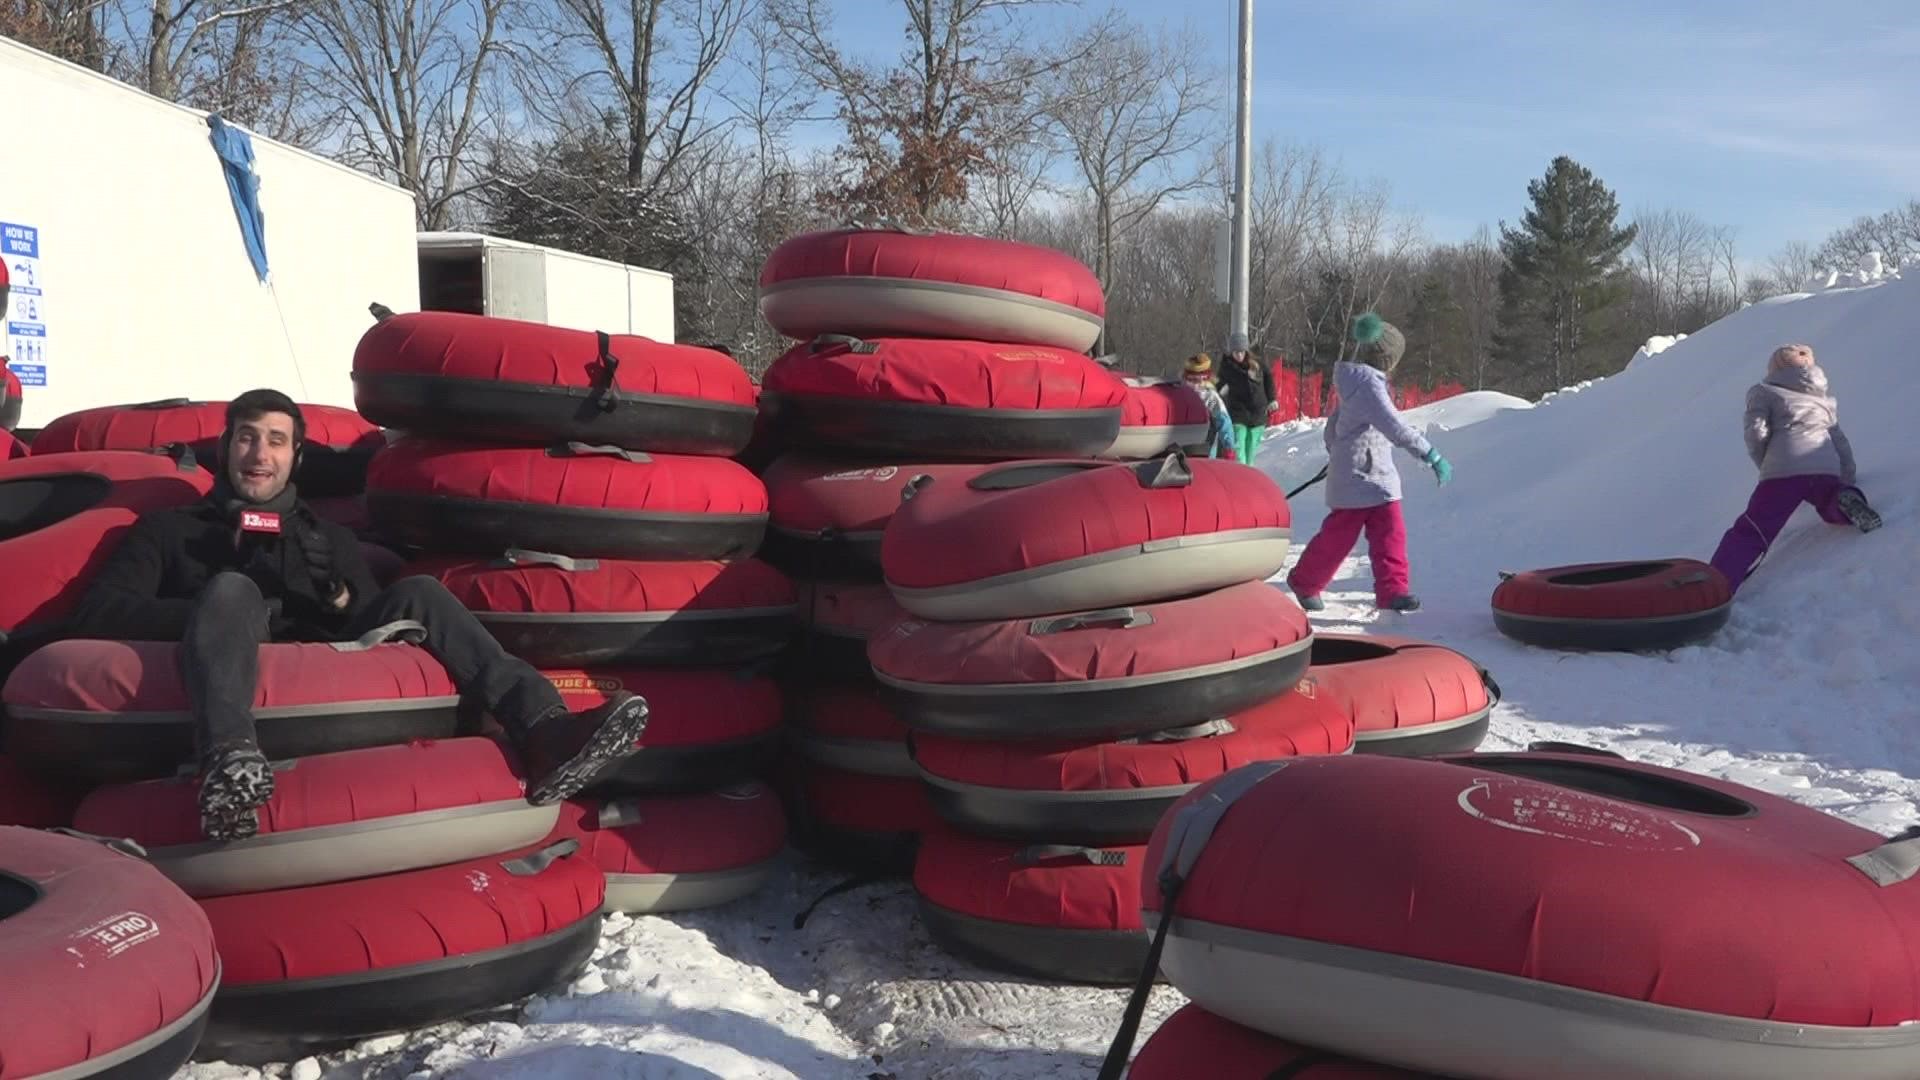 Friday's opening day was a very late start for Cannonsburg, which usually opens in mid-December.